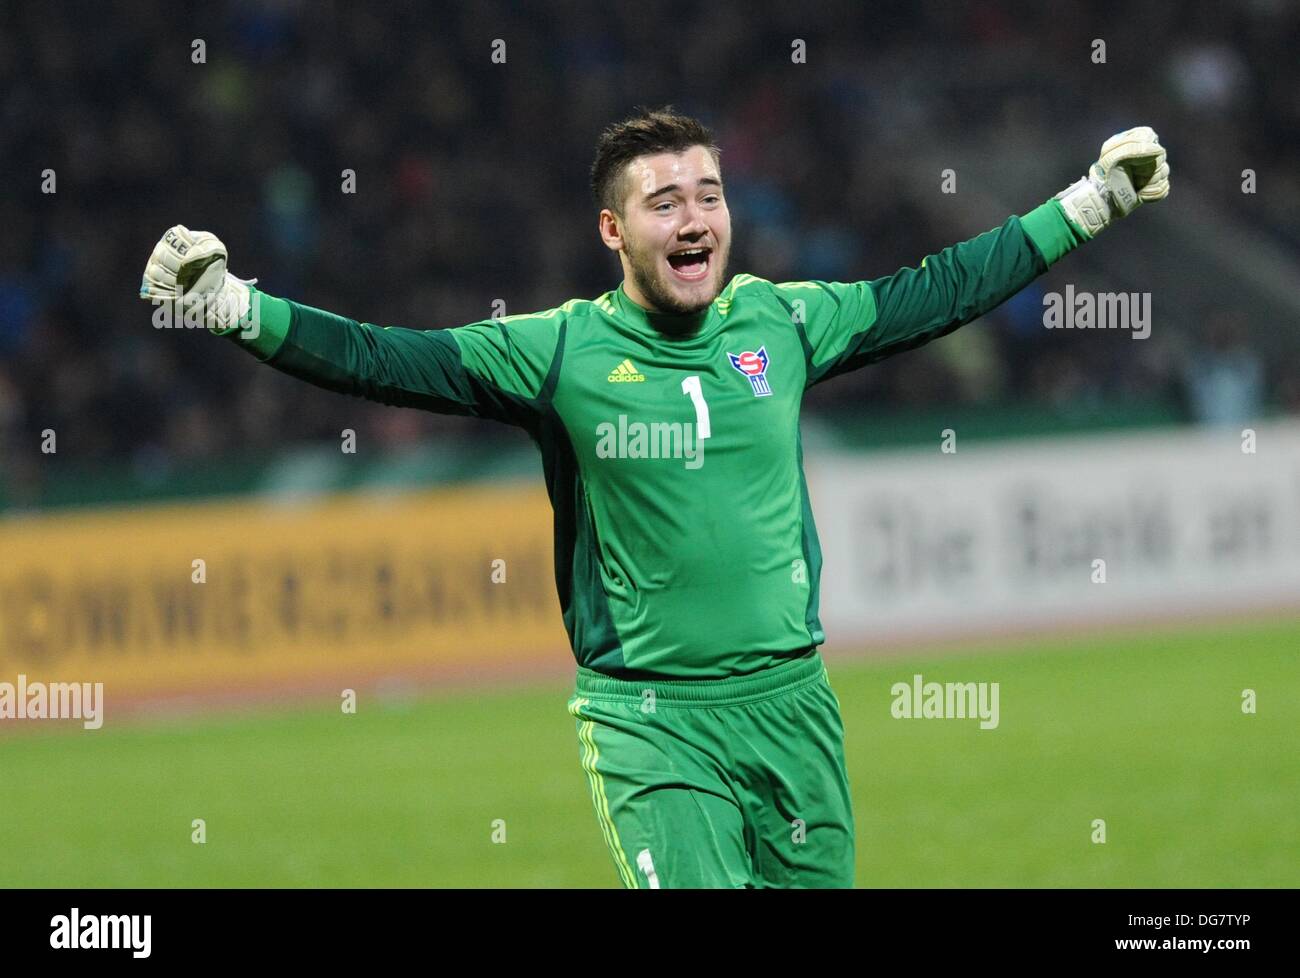 Kassel, Germany. 15th Oct, 2013. Faroe Island's goalkeeper Teitur M.  Gestsson during the EURO under 21 qualification match between Germany and  Faroe Islands at Auestadium in Kassel, Germany, 15 October 2013. Photo: